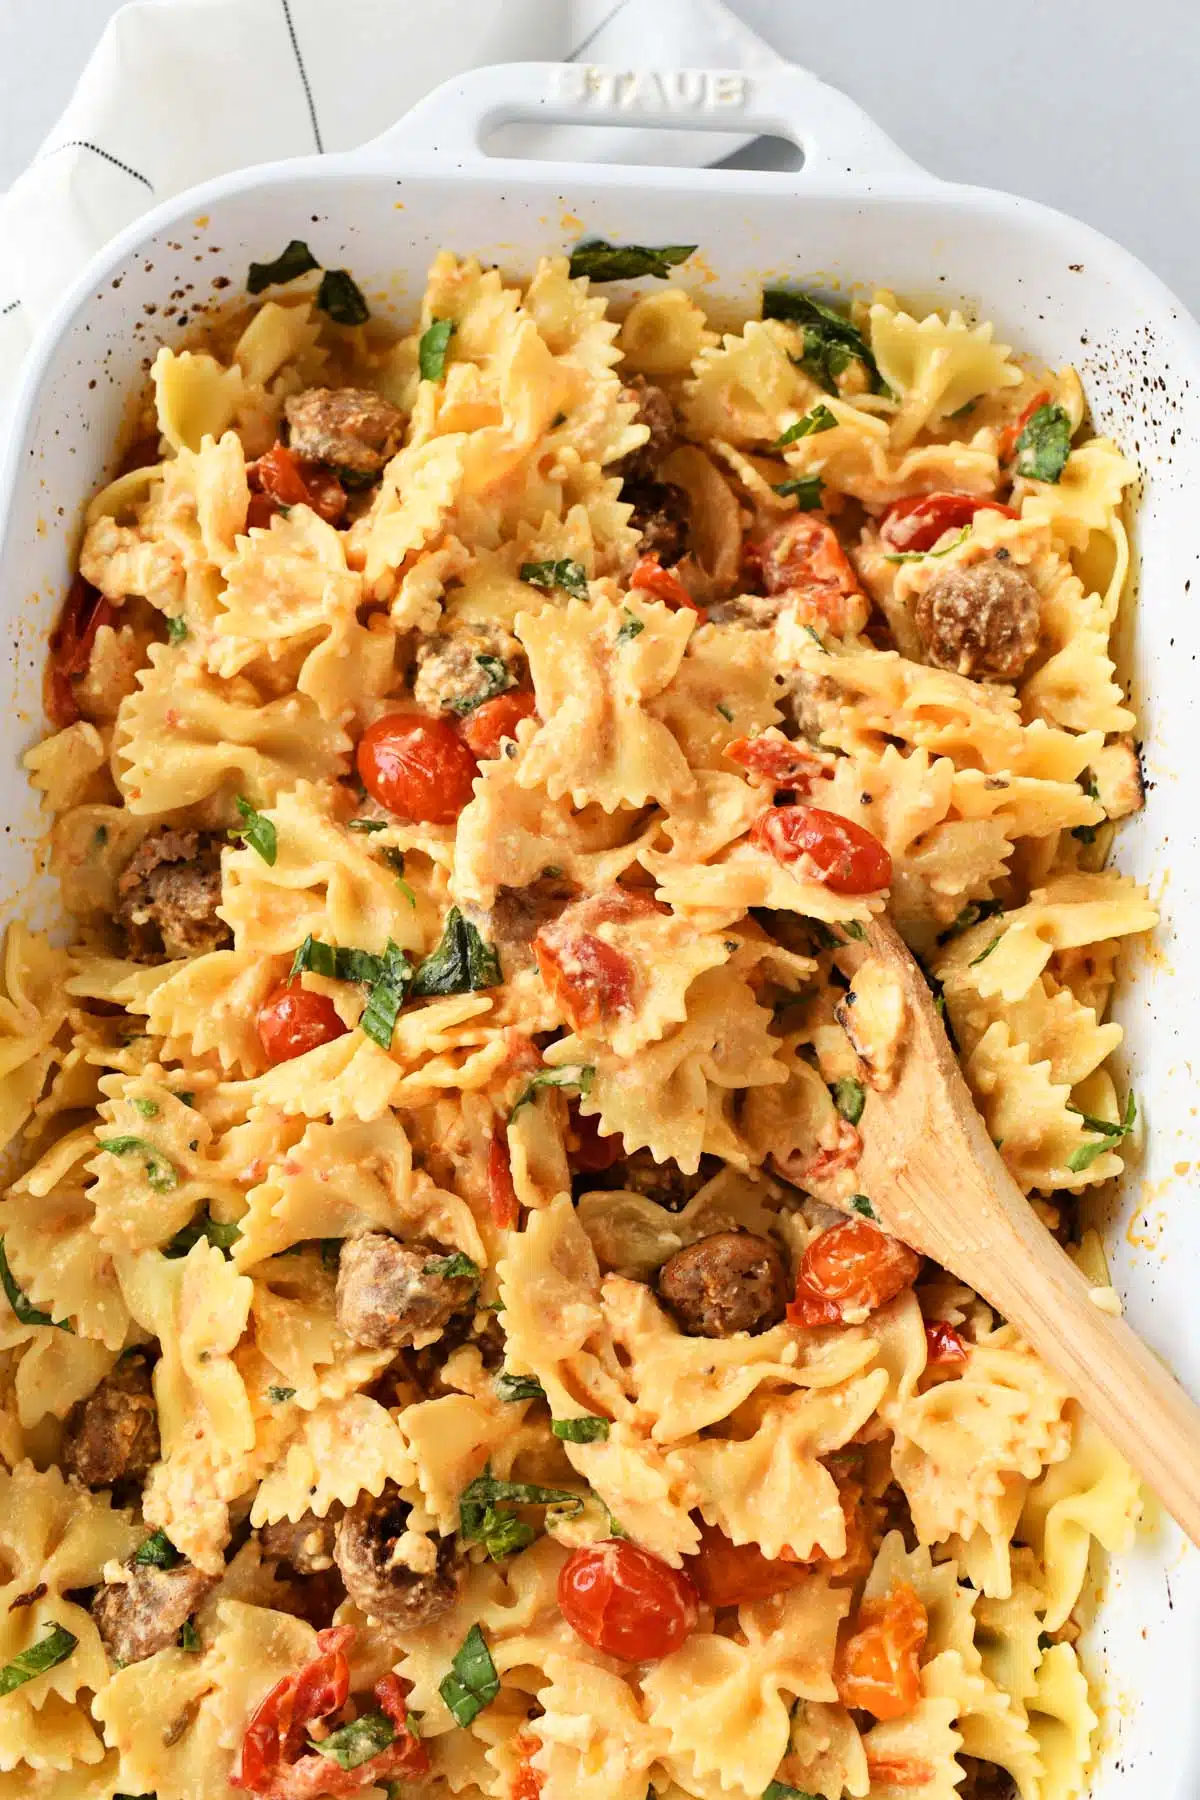 A wooden spoon inside sausage and feta pasta.